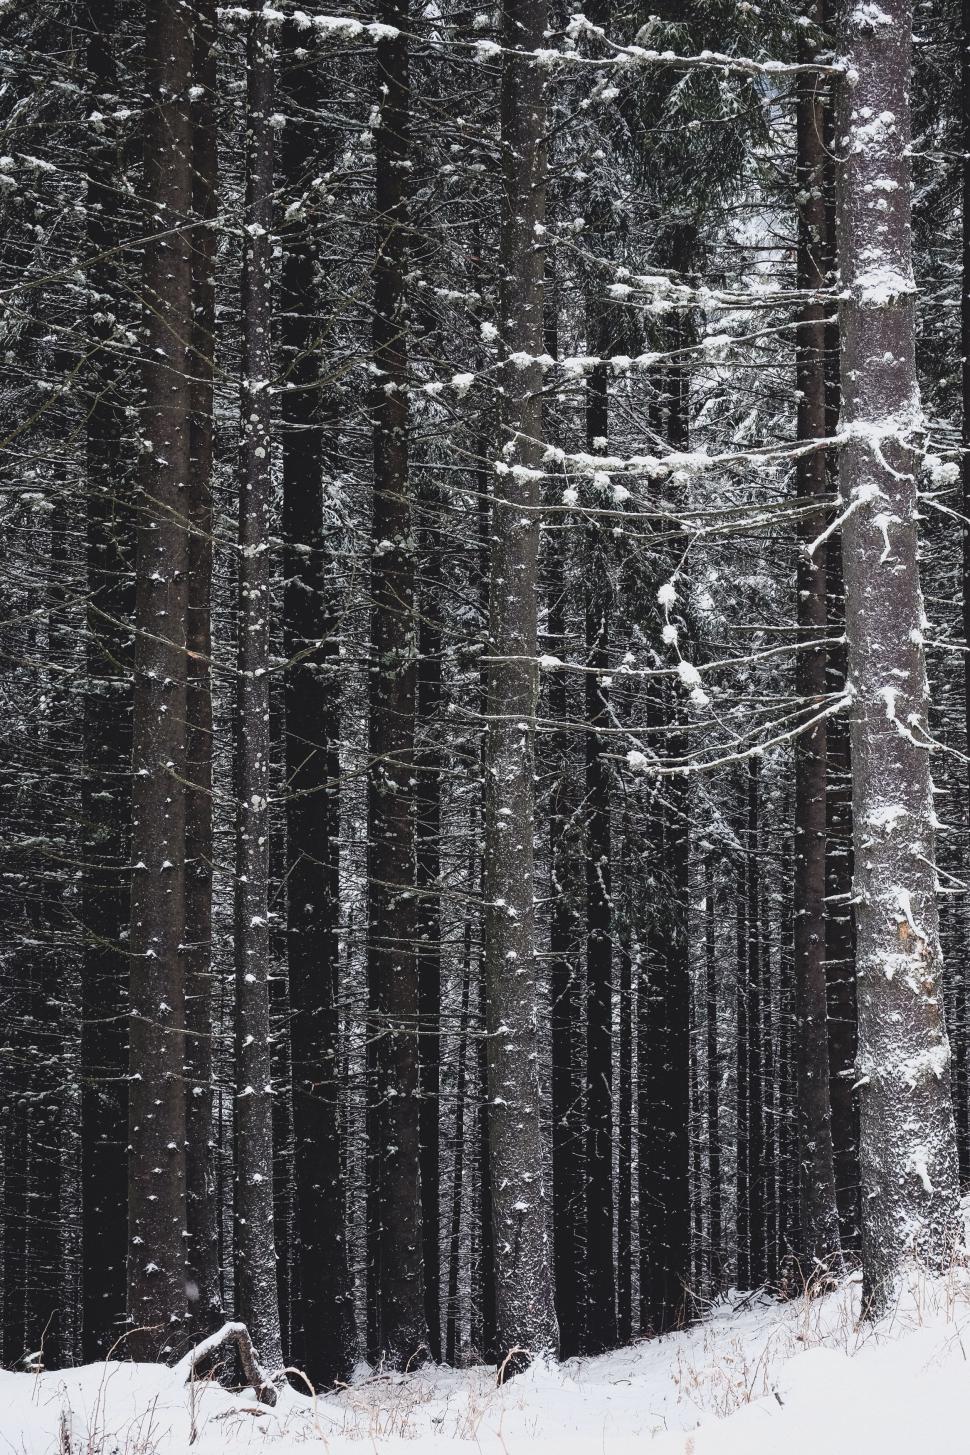 Free Image of Snowy Forest in Black and White 